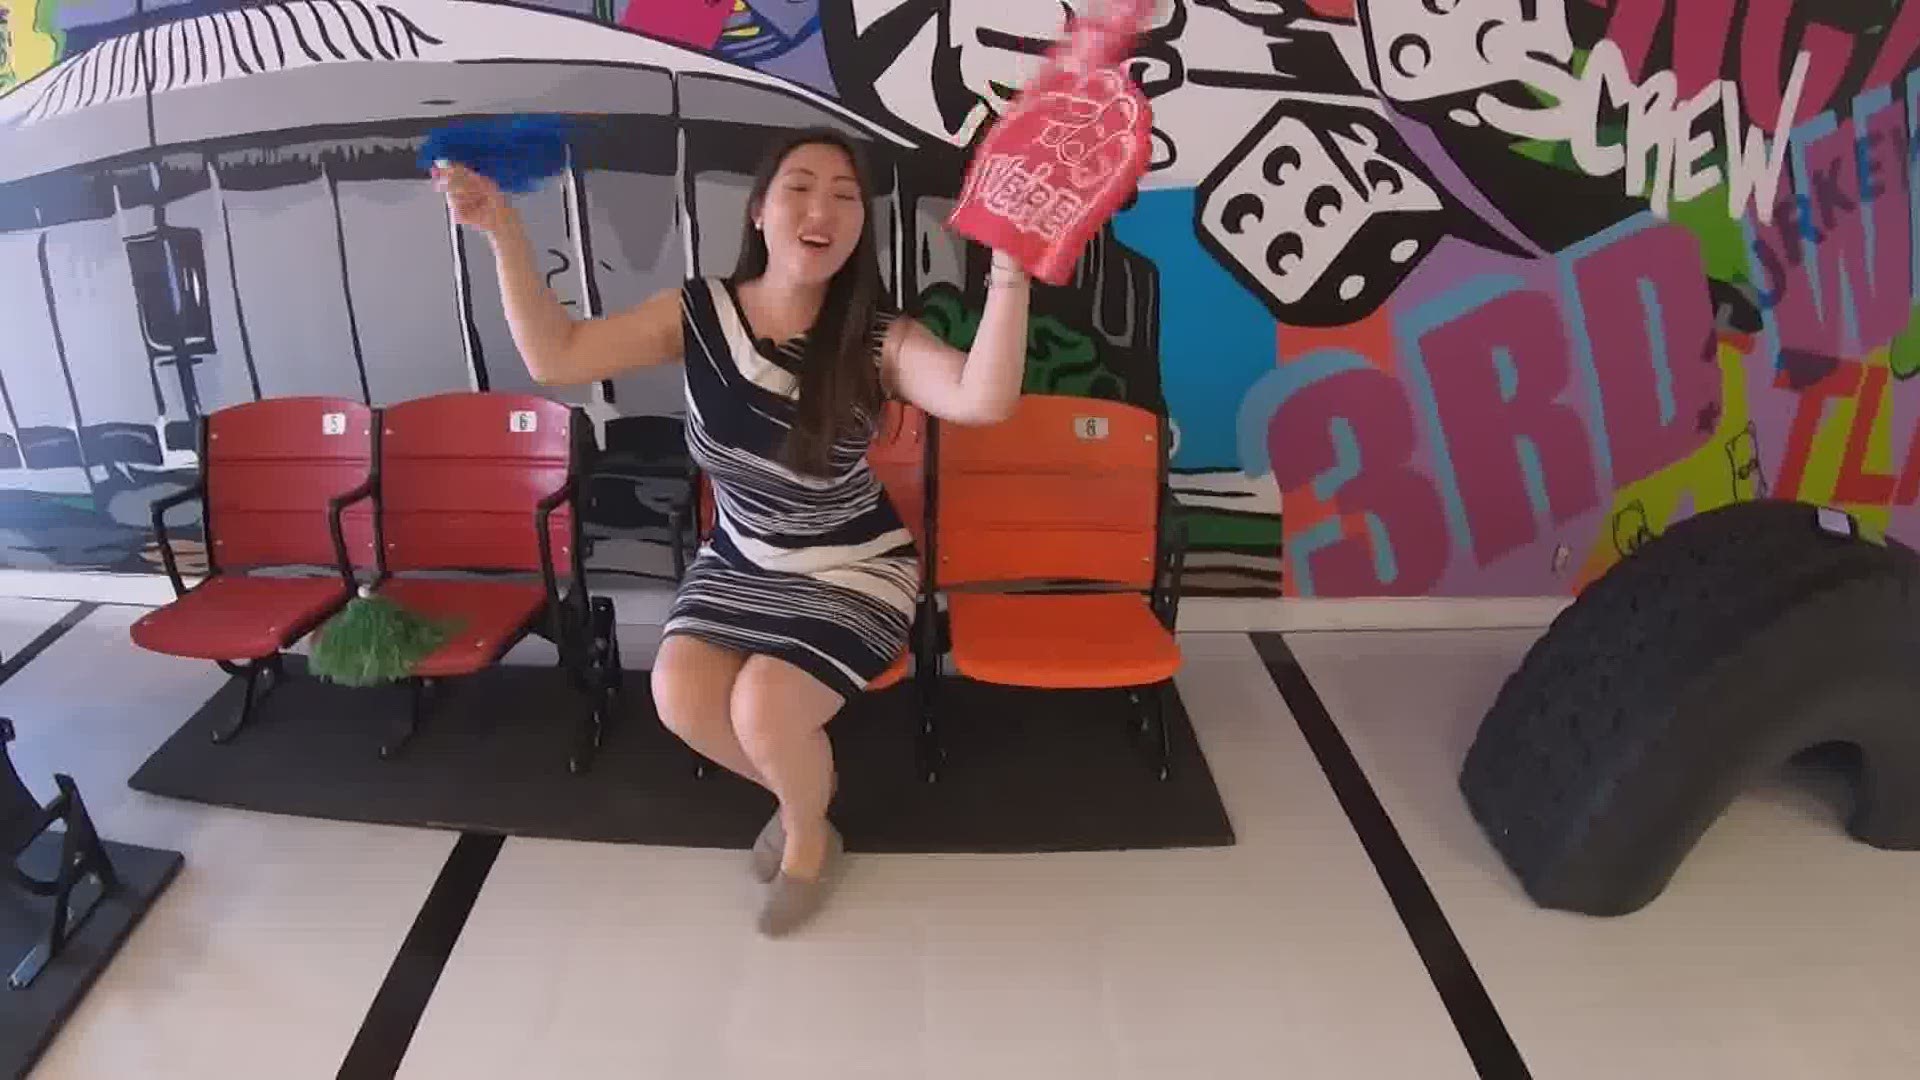 #HTownRush's Michelle Choi takes you inside a special game you can play now in Rice Village